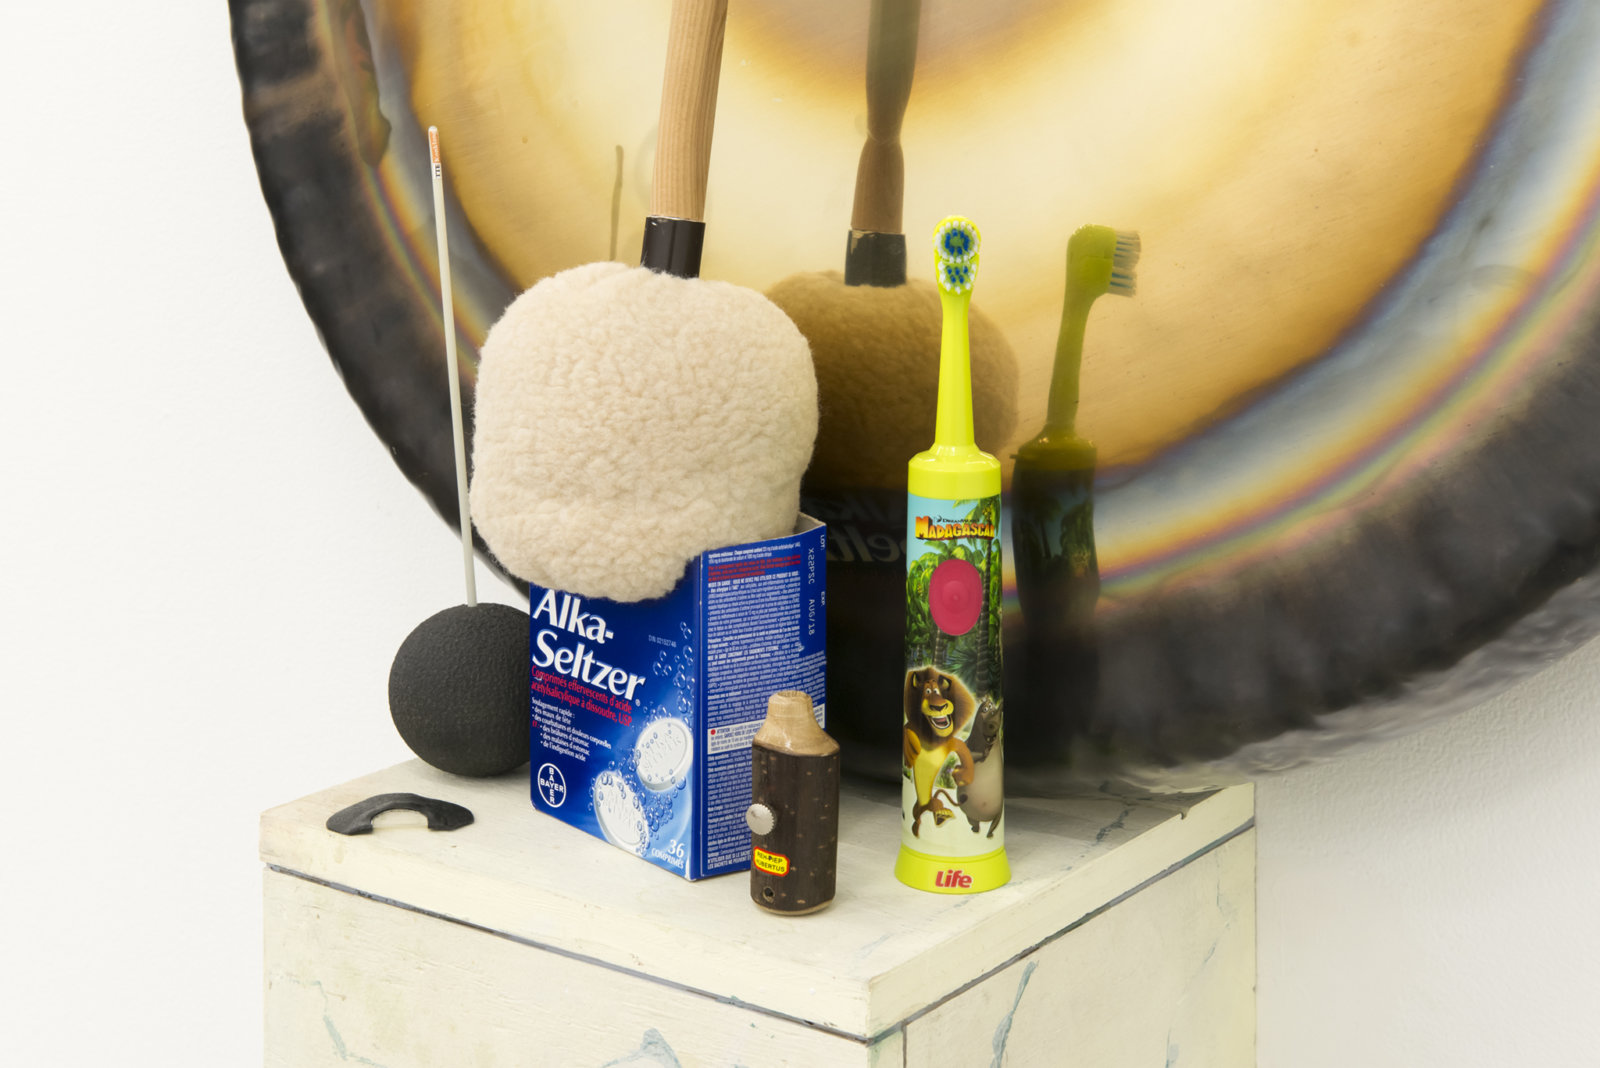 Ashes Withyman, Musca, Altar, Cetus, Compass, Furnas, River, Cup (detail), 2017–2018, gong, alka-seltzer, mallet, animal calls, electric toothbrush, bell, painted plywood, 25 x 32 x 9 in. (64 x 81 x 23 cm)